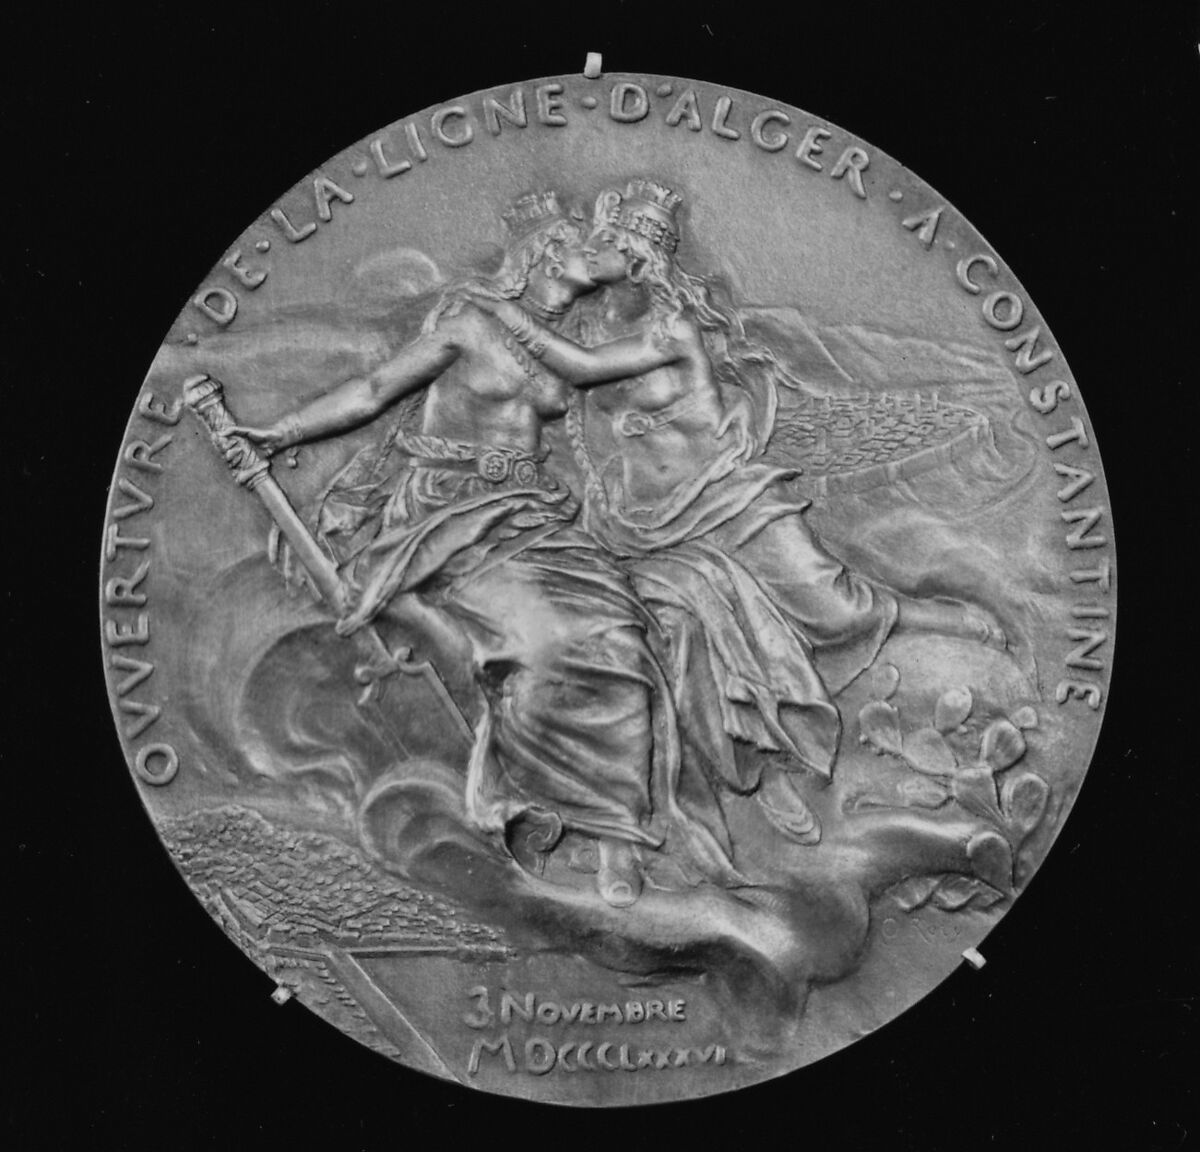 Opening of the Railway Line Between Algiers and Constantine, November 3, 1886, Medalist: Louis-Oscar Roty (French, Paris 1846–1911 Paris), Bronze, struck, silvered, French 